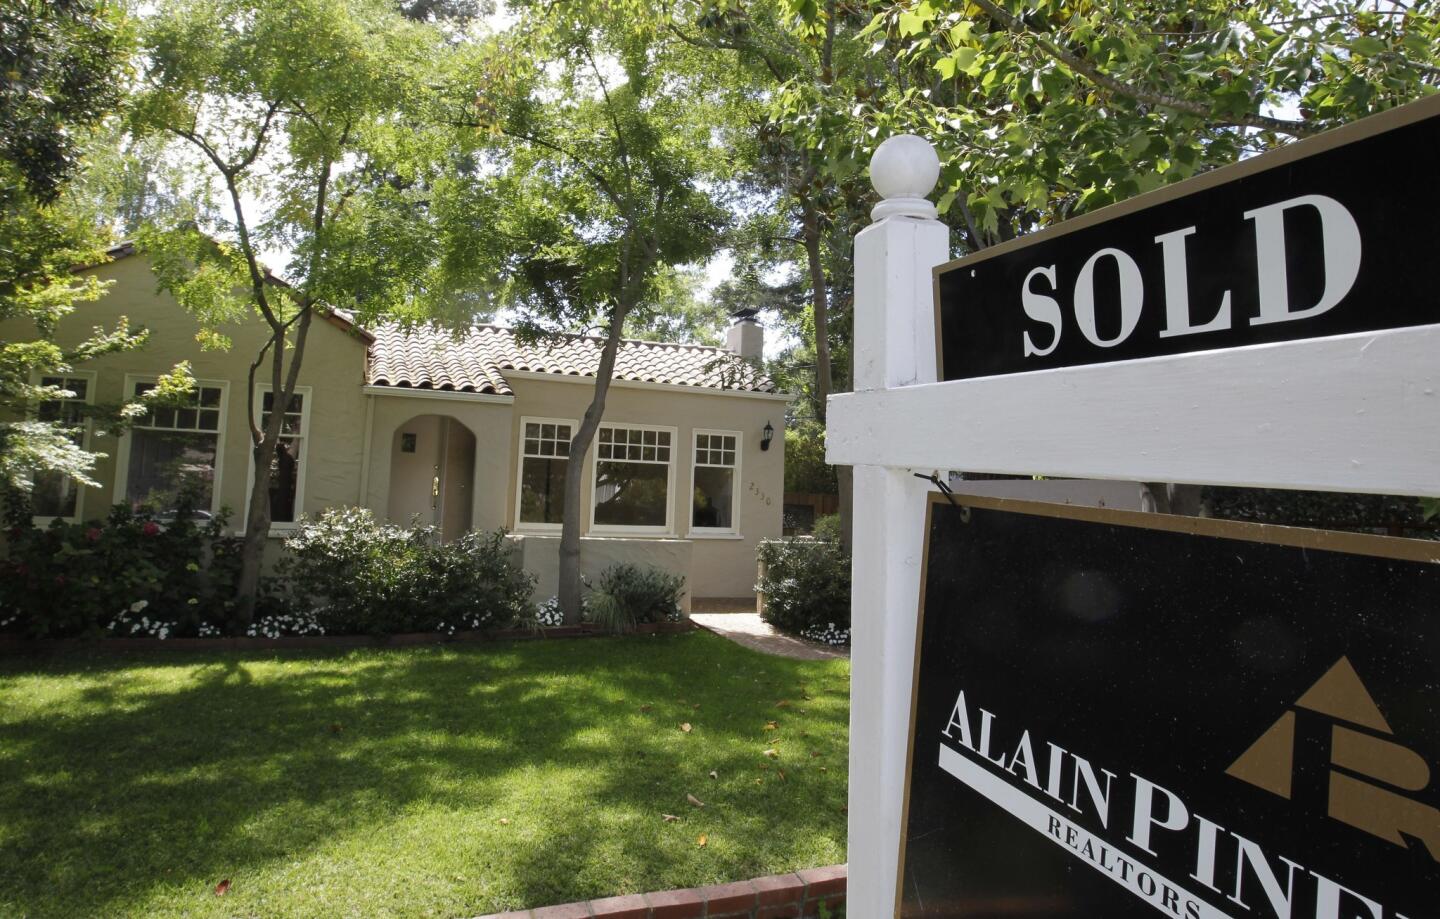 Palo Alto was No. 1 in the list of top cities to live in by Livability.com. The city, which has about 66,000 residents according to census figures, is home to Stanford University. Above, a 2012 file photo shows a view of a home sold in the area.